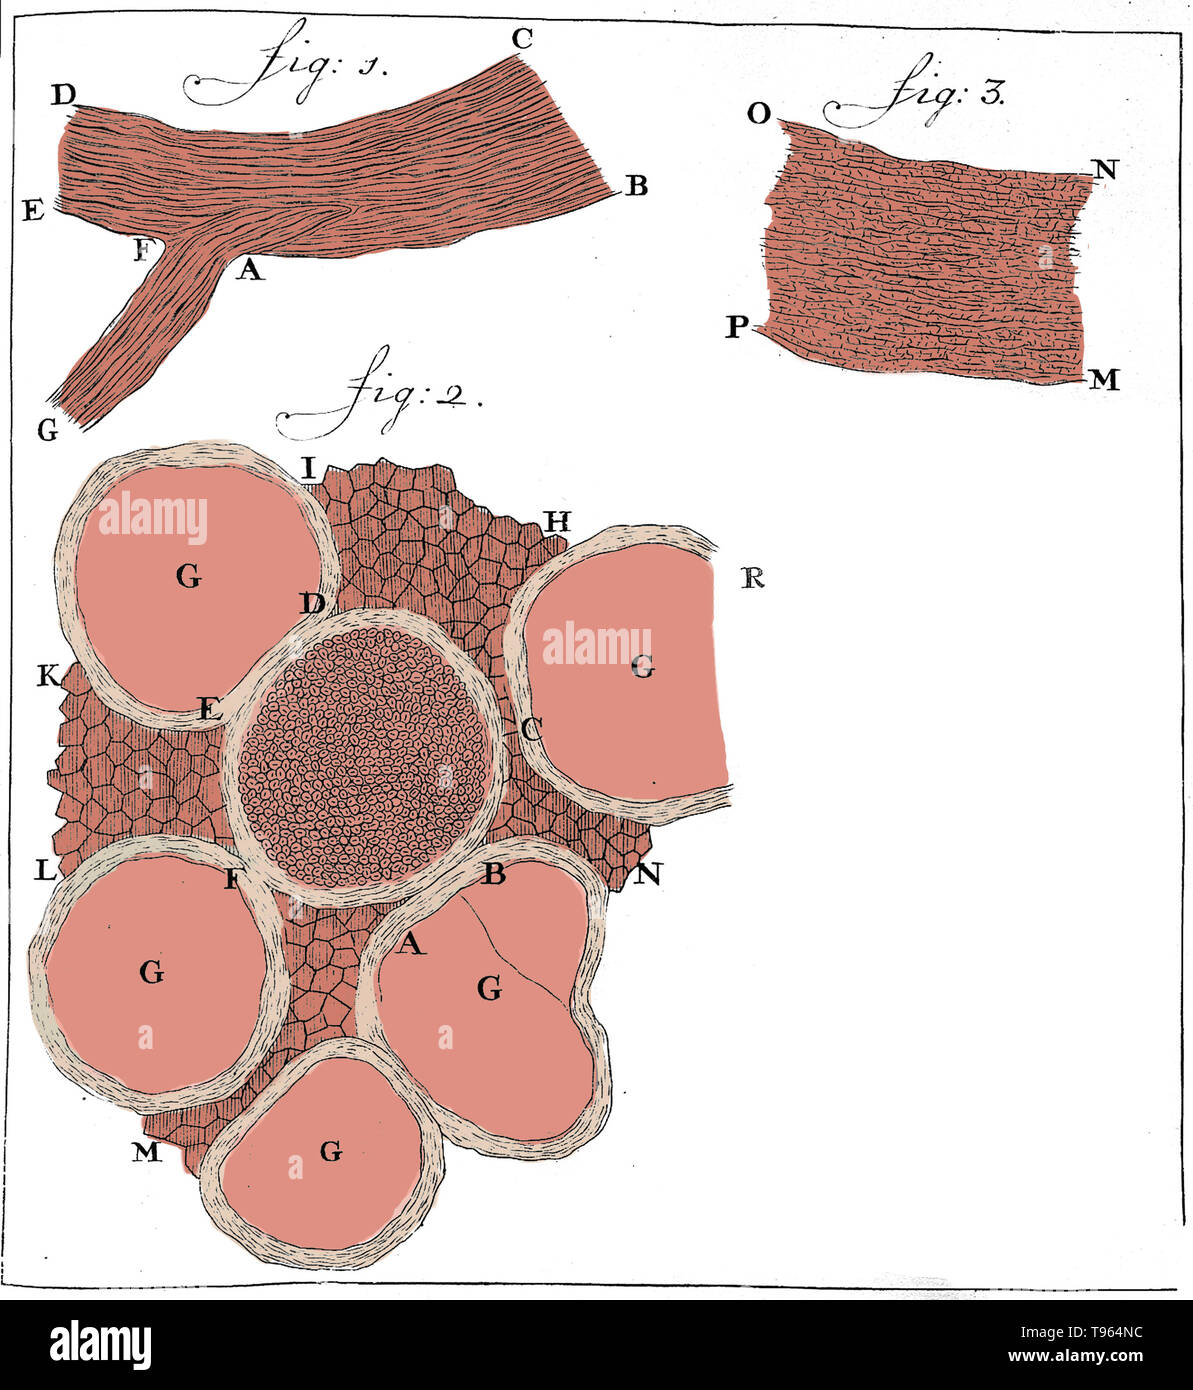 Sections of nerves drawn by Anthony van Leeuwenhoek. Fig 1: Longitudinal section of peripheral nerve. Fig. 2: Transverse section of nerve showing individual fibres. Published: 1719. Leeuwenhoek (1632-1723) was a Dutch scientist, now considered the first microbiologist. He is best known for his work on the improvement of the microscope and for his contributions towards the establishment of microbiology. Stock Photo